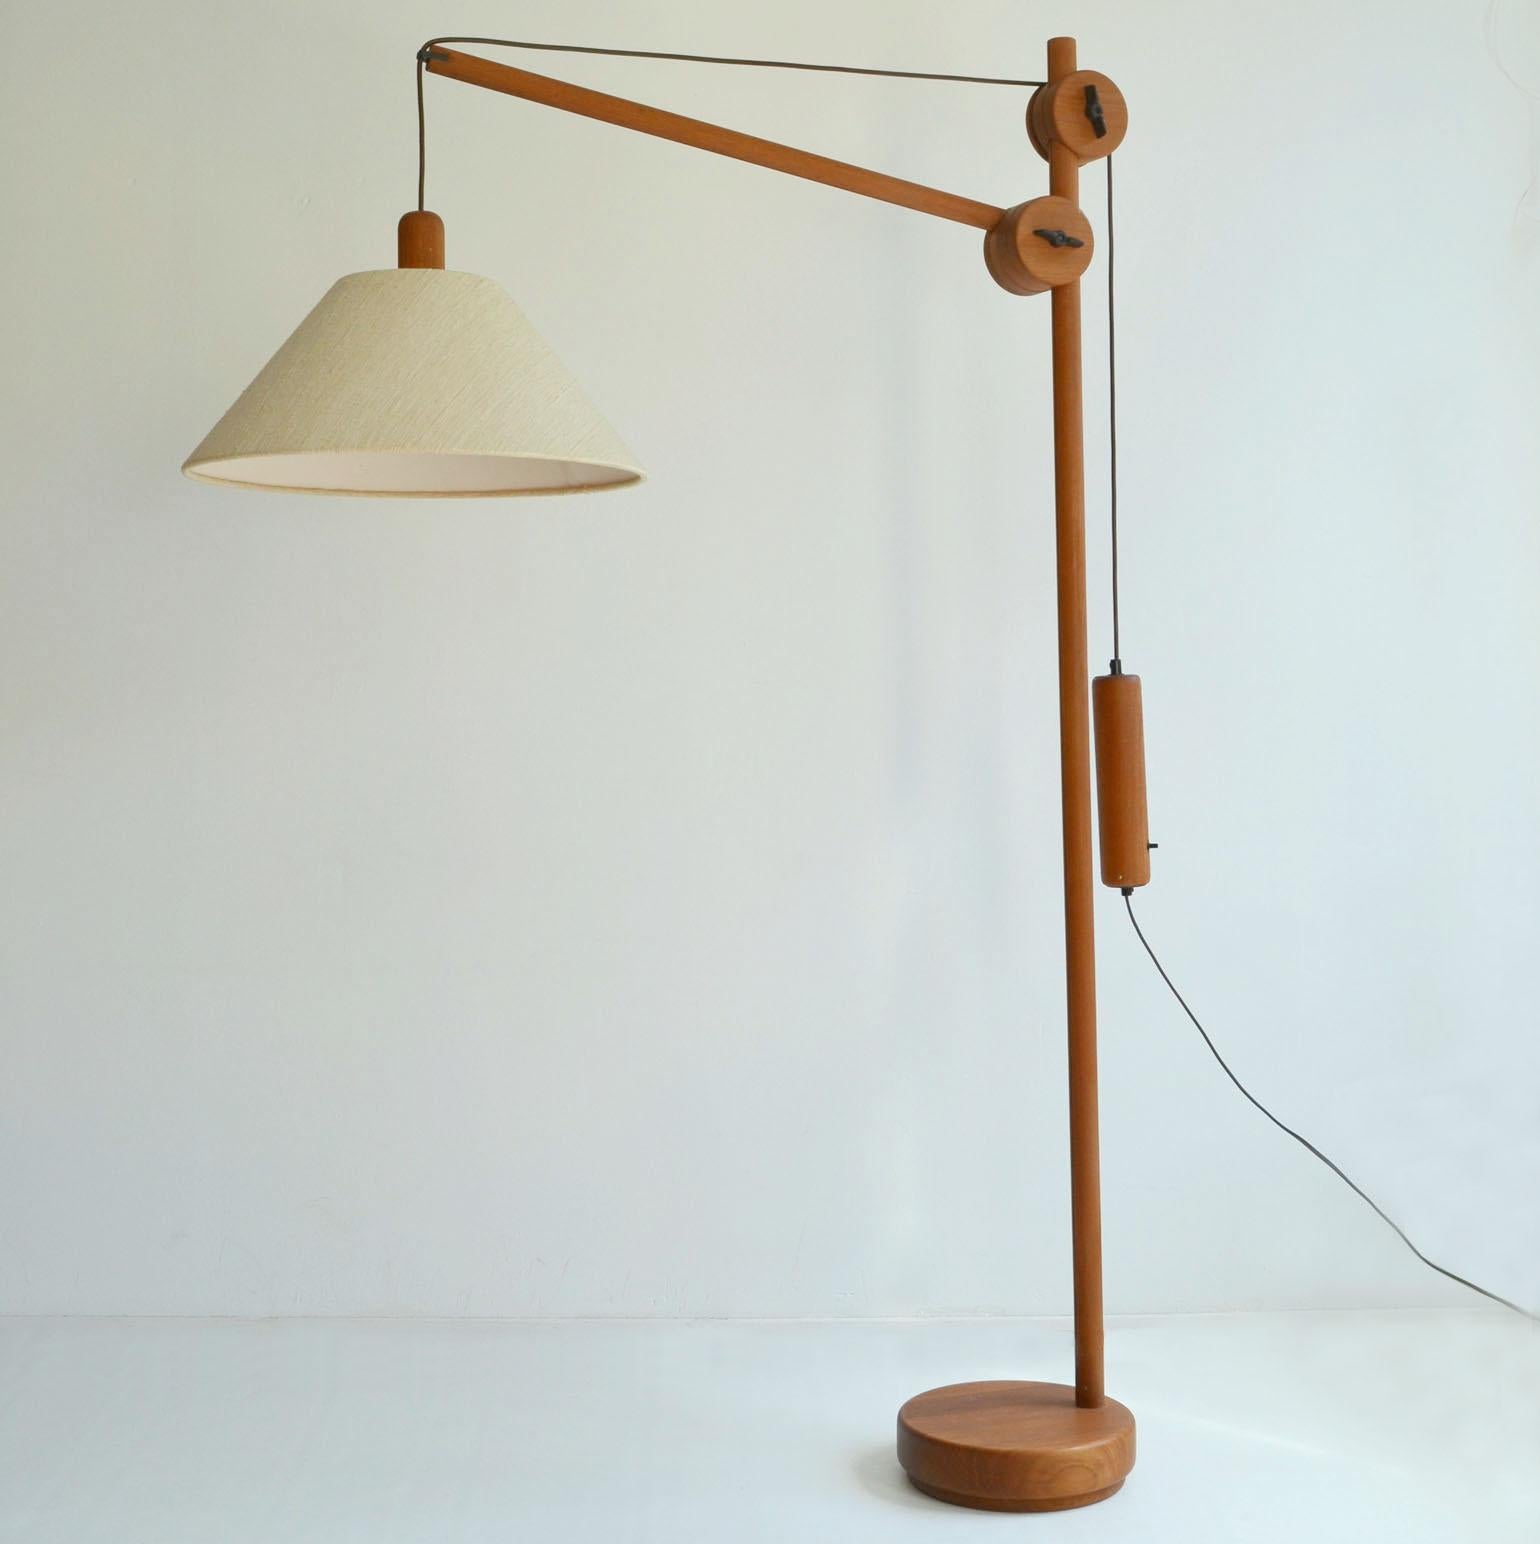 Sculptural Danish Mid-Century Modern floor lamp, early 1970's. The teak frame has an adjustable arm (with a length of 100 cm) and counterbalance weight for positioning of the light source. The lamp and counterweight move in opposite directions, both